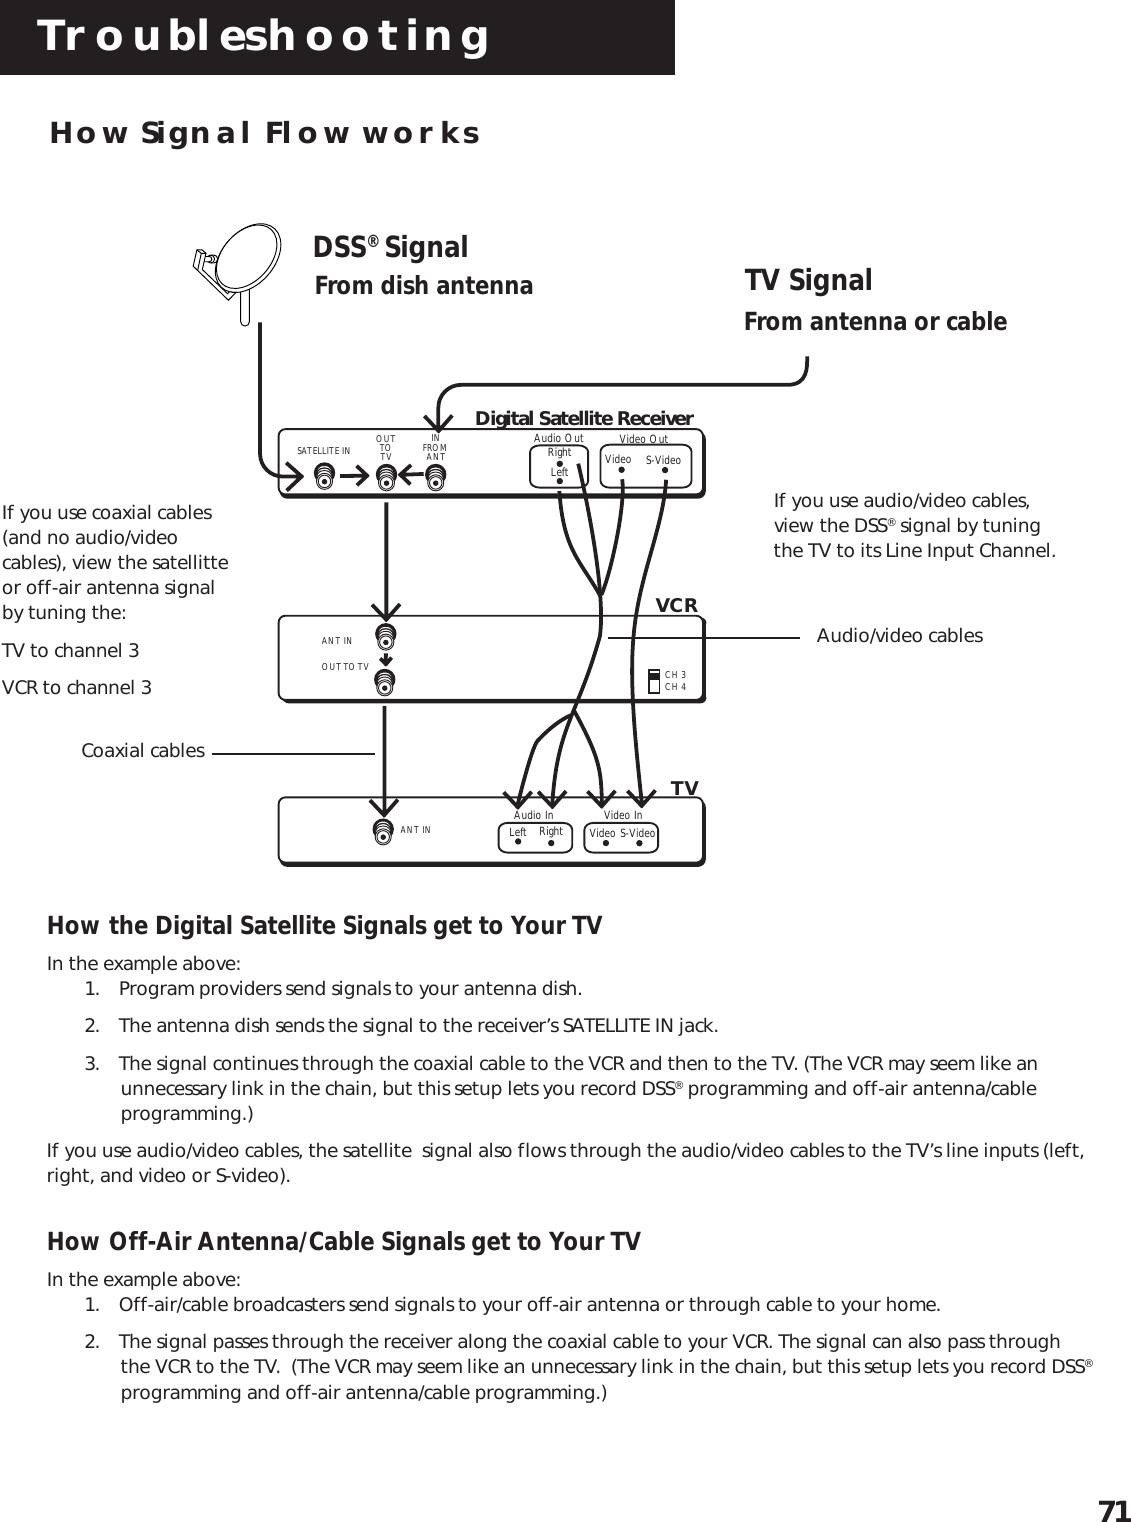 Troubleshooting71How Signal Flow worksHow the Digital Satellite Signals get to Your TVIn the example above:1. Program providers send signals to your antenna dish.2. The antenna dish sends the signal to the receiver’s SATELLITE IN jack.3. The signal continues through the coaxial cable to the VCR and then to the TV. (The VCR may seem like an       unnecessary link in the chain, but this setup lets you record DSS® programming and off-air antenna/cable       programming.)If you use audio/video cables, the satellite  signal also flows through the audio/video cables to the TV’s line inputs (left,right, and video or S-video).How Off-Air Antenna/Cable Signals get to Your TVIn the example above:1. Off-air/cable broadcasters send signals to your off-air antenna or through cable to your home.2. The signal passes through the receiver along the coaxial cable to your VCR. The signal can also pass through       the VCR to the TV.  (The VCR may seem like an unnecessary link in the chain, but this setup lets you record DSS®       programming and off-air antenna/cable programming.)DSS® SignalFrom dish antenna TV SignalFrom antenna or cableIf you use audio/video cables,view the DSS® signal by tuningthe TV to its Line Input Channel.If you use coaxial cables(and no audio/videocables), view the satellitteor off-air antenna signalby tuning the:TV to channel 3VCR to channel 3Coaxial cablesAudio/video cablesDigital Satellite ReceiverVCRTVVideo OutAudio OutS-VideoVideoLeftRightANT INOUT TO TV CH 3CH 4ANT INSATELLITE IN INFROM ANTOUTTOTVVideo InS-VideoVideoAudio InLeft Right